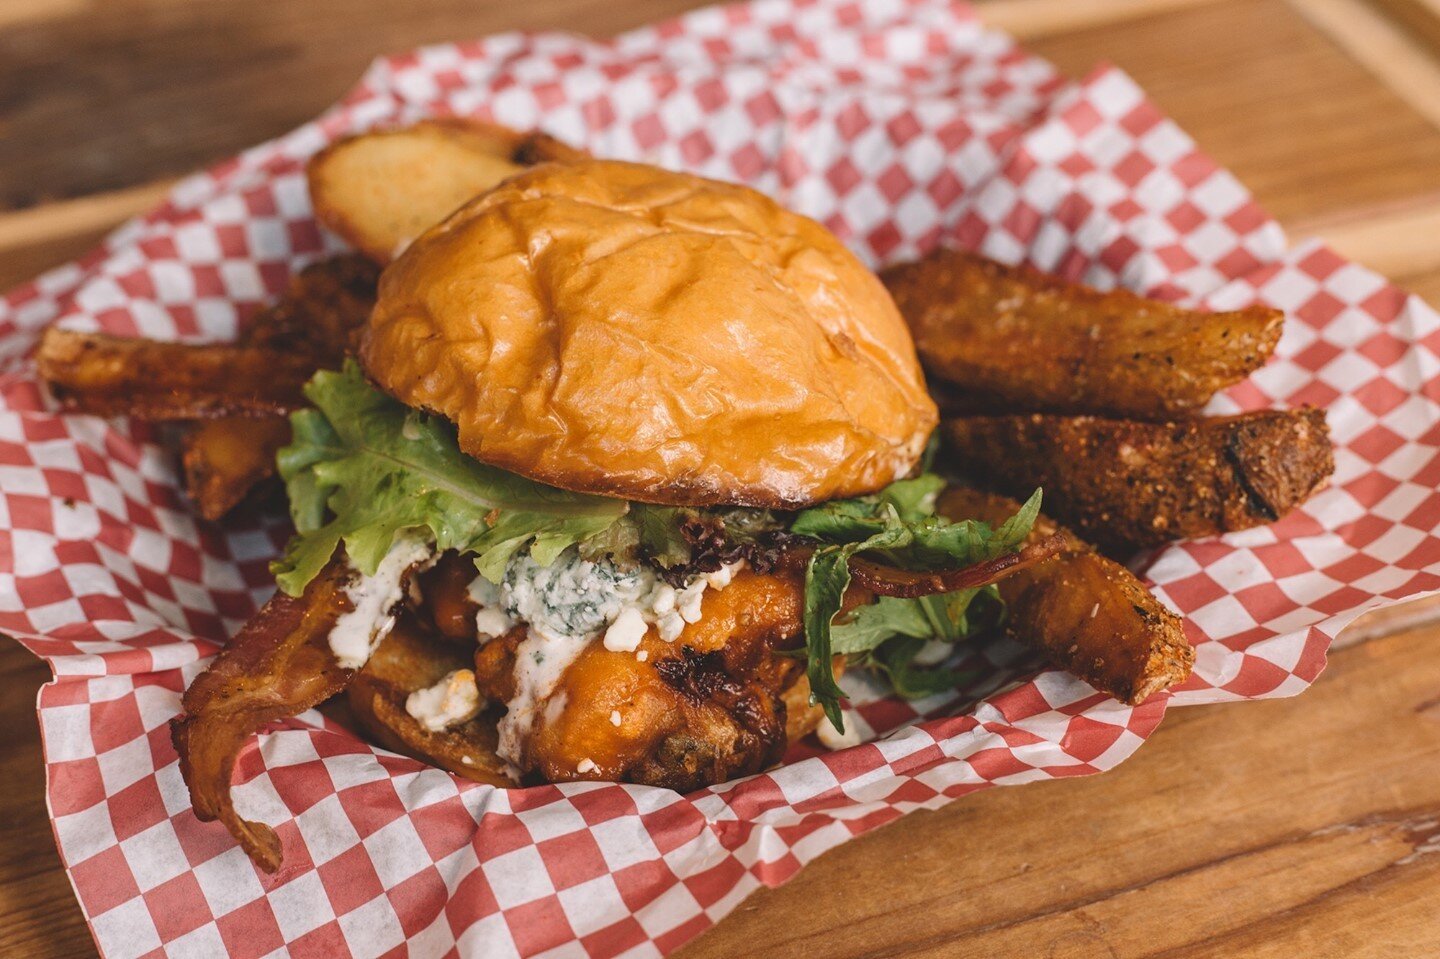 The Buffalo Starchild is one monster of a sandwich. A fried chicken thigh, tossed in buffalo sauce, with blue cheese crumbles and bacon, topped with lettuce and black pepper ranch. Comes with wedges!⁠
.⁠
.⁠
.⁠
#WatsonsShack #Watsons #WatsonsRail #UIU